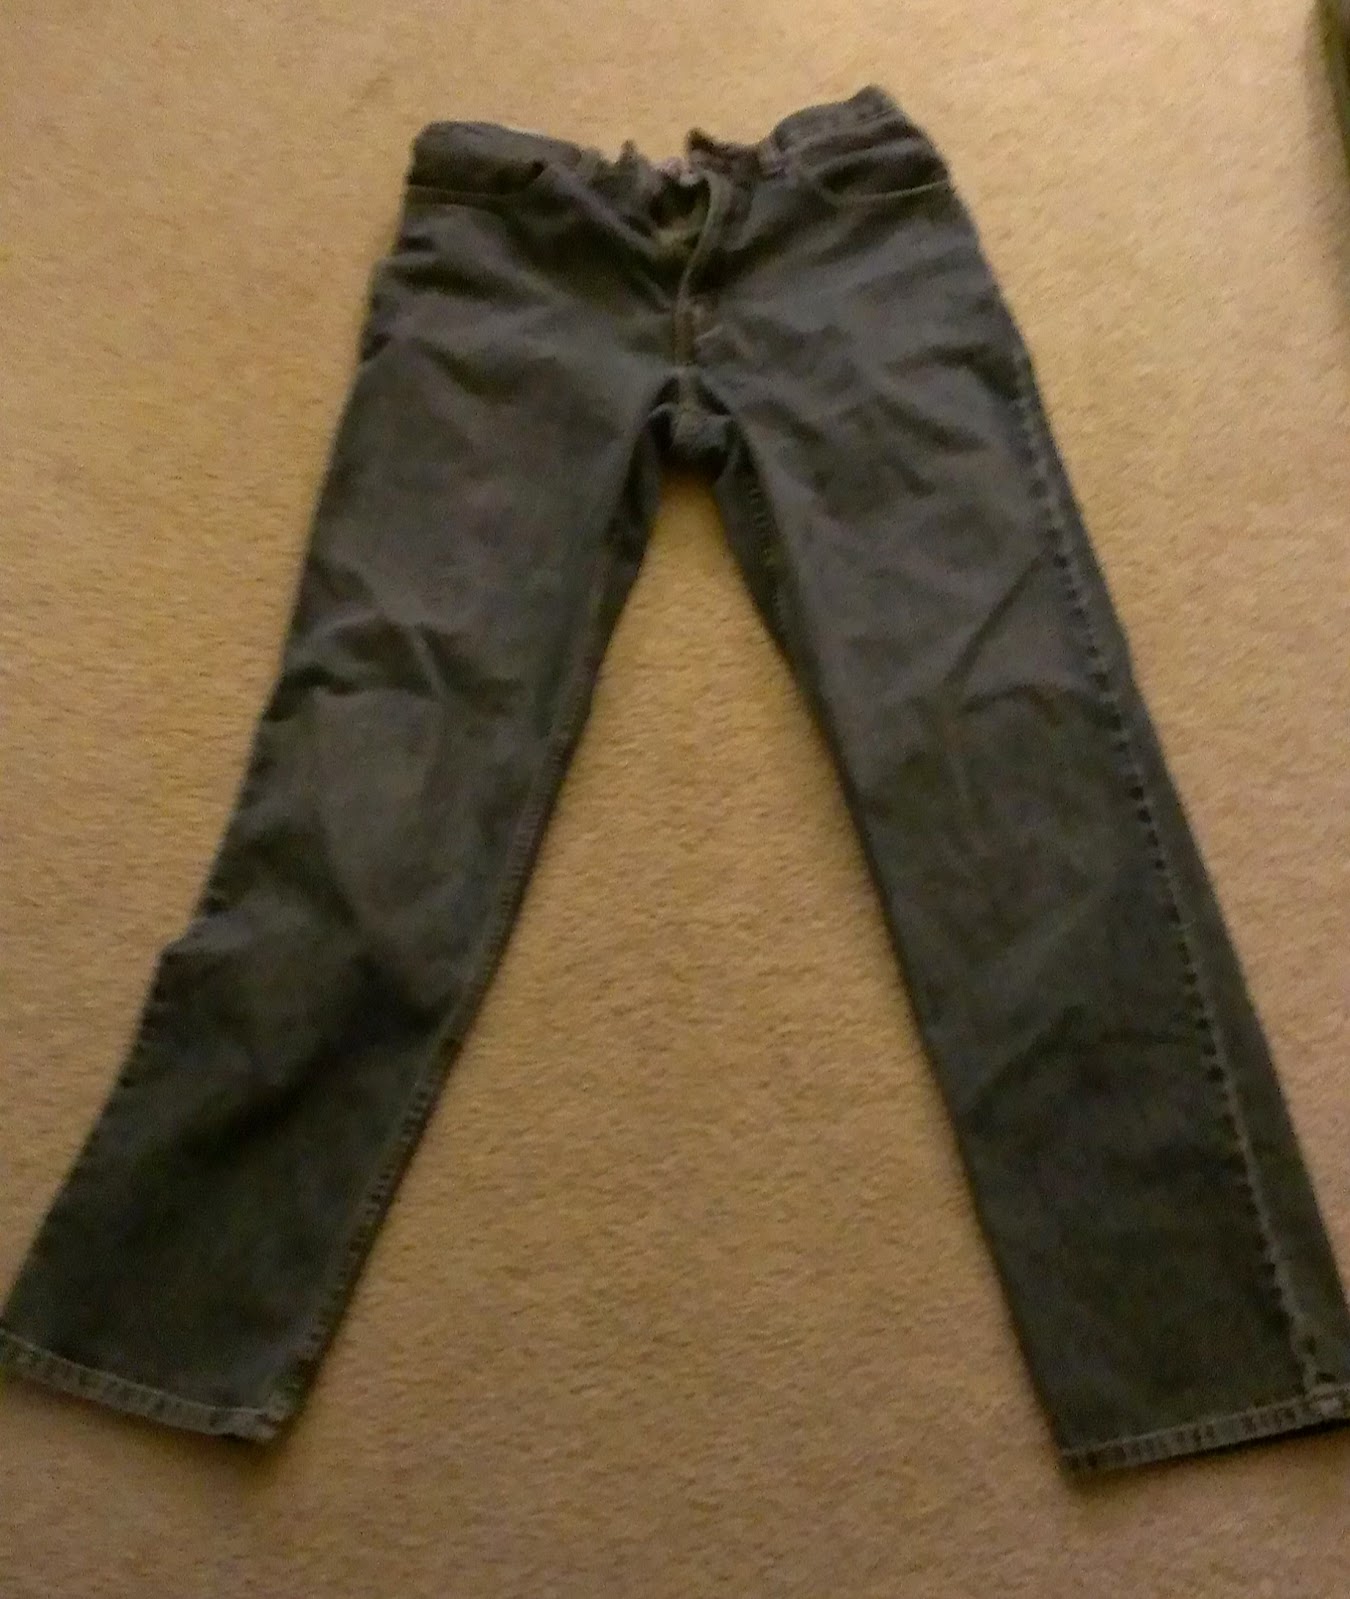 Two-Fisted Action Science: Experiment 1: Transforming Pants